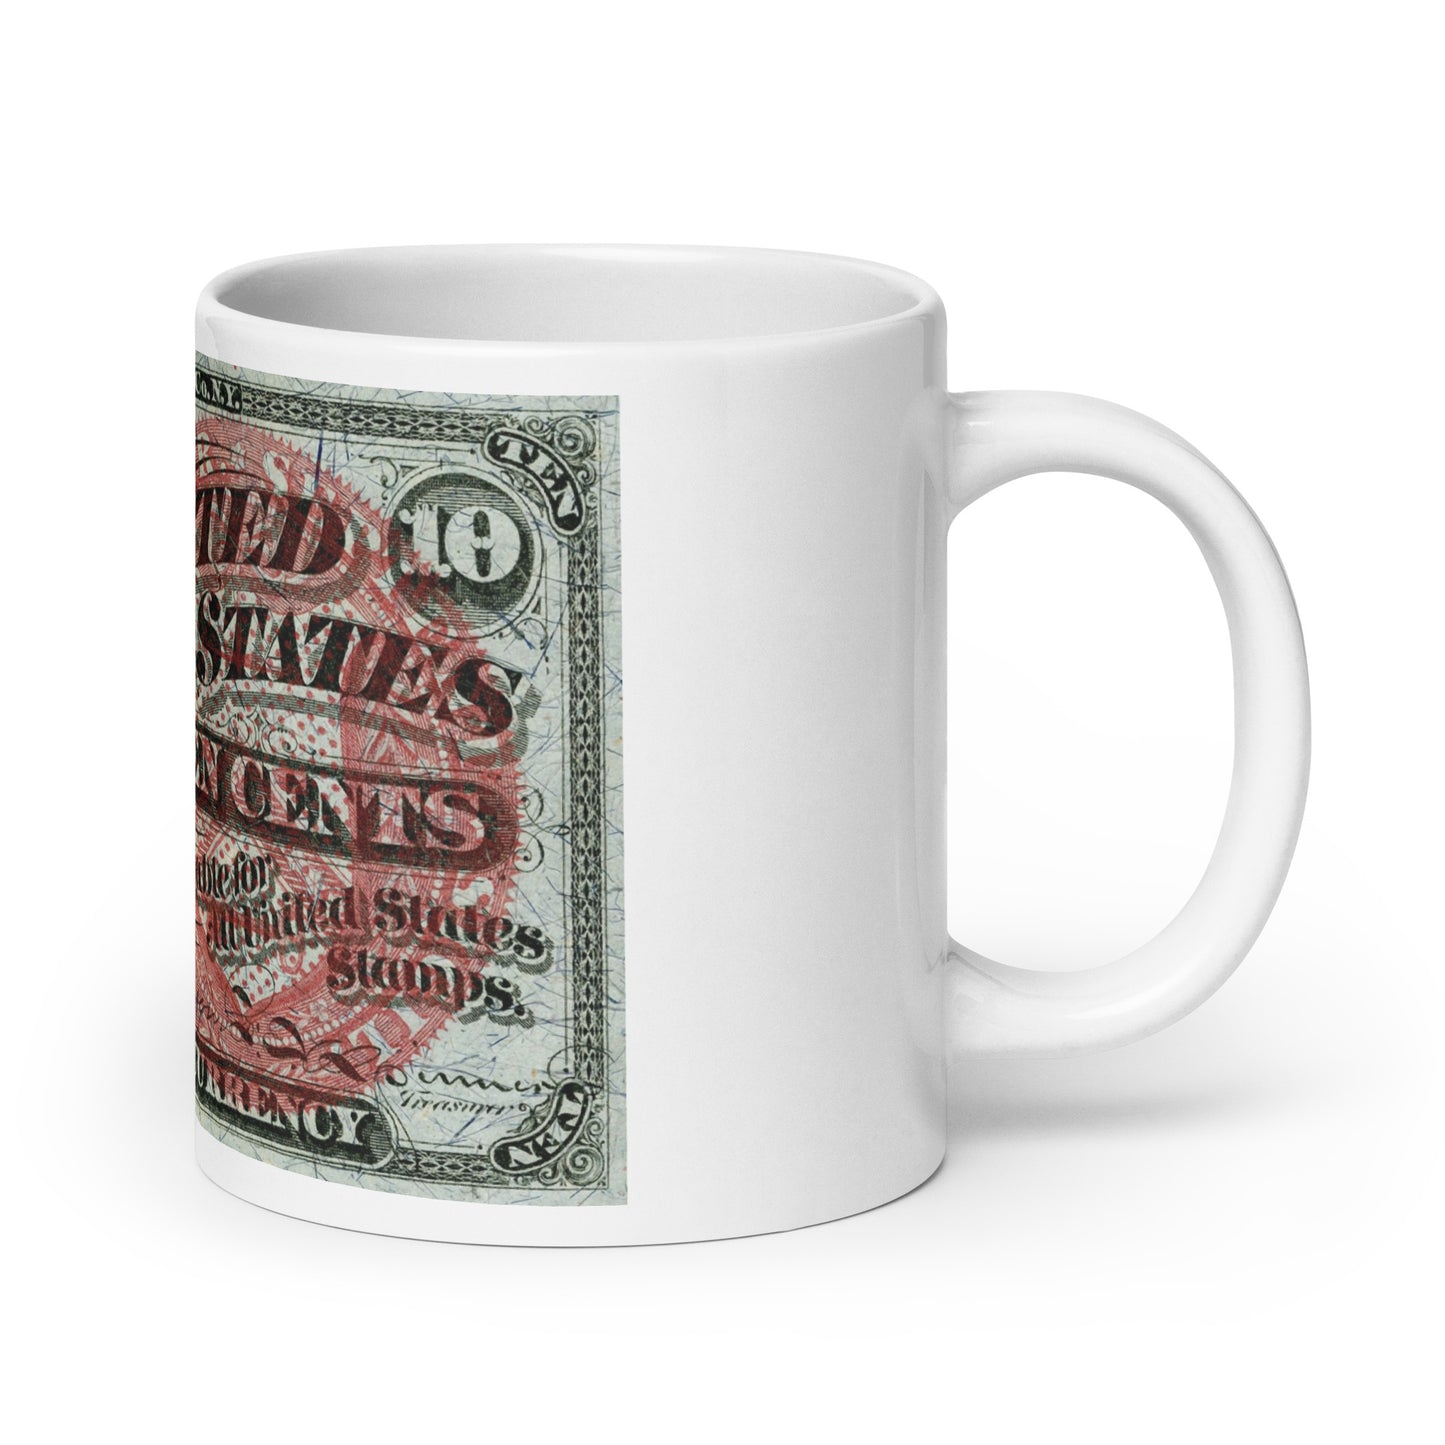 10 Cents 4TH Issue Fractional Currency Edition - Classic Currency Collector's Mug